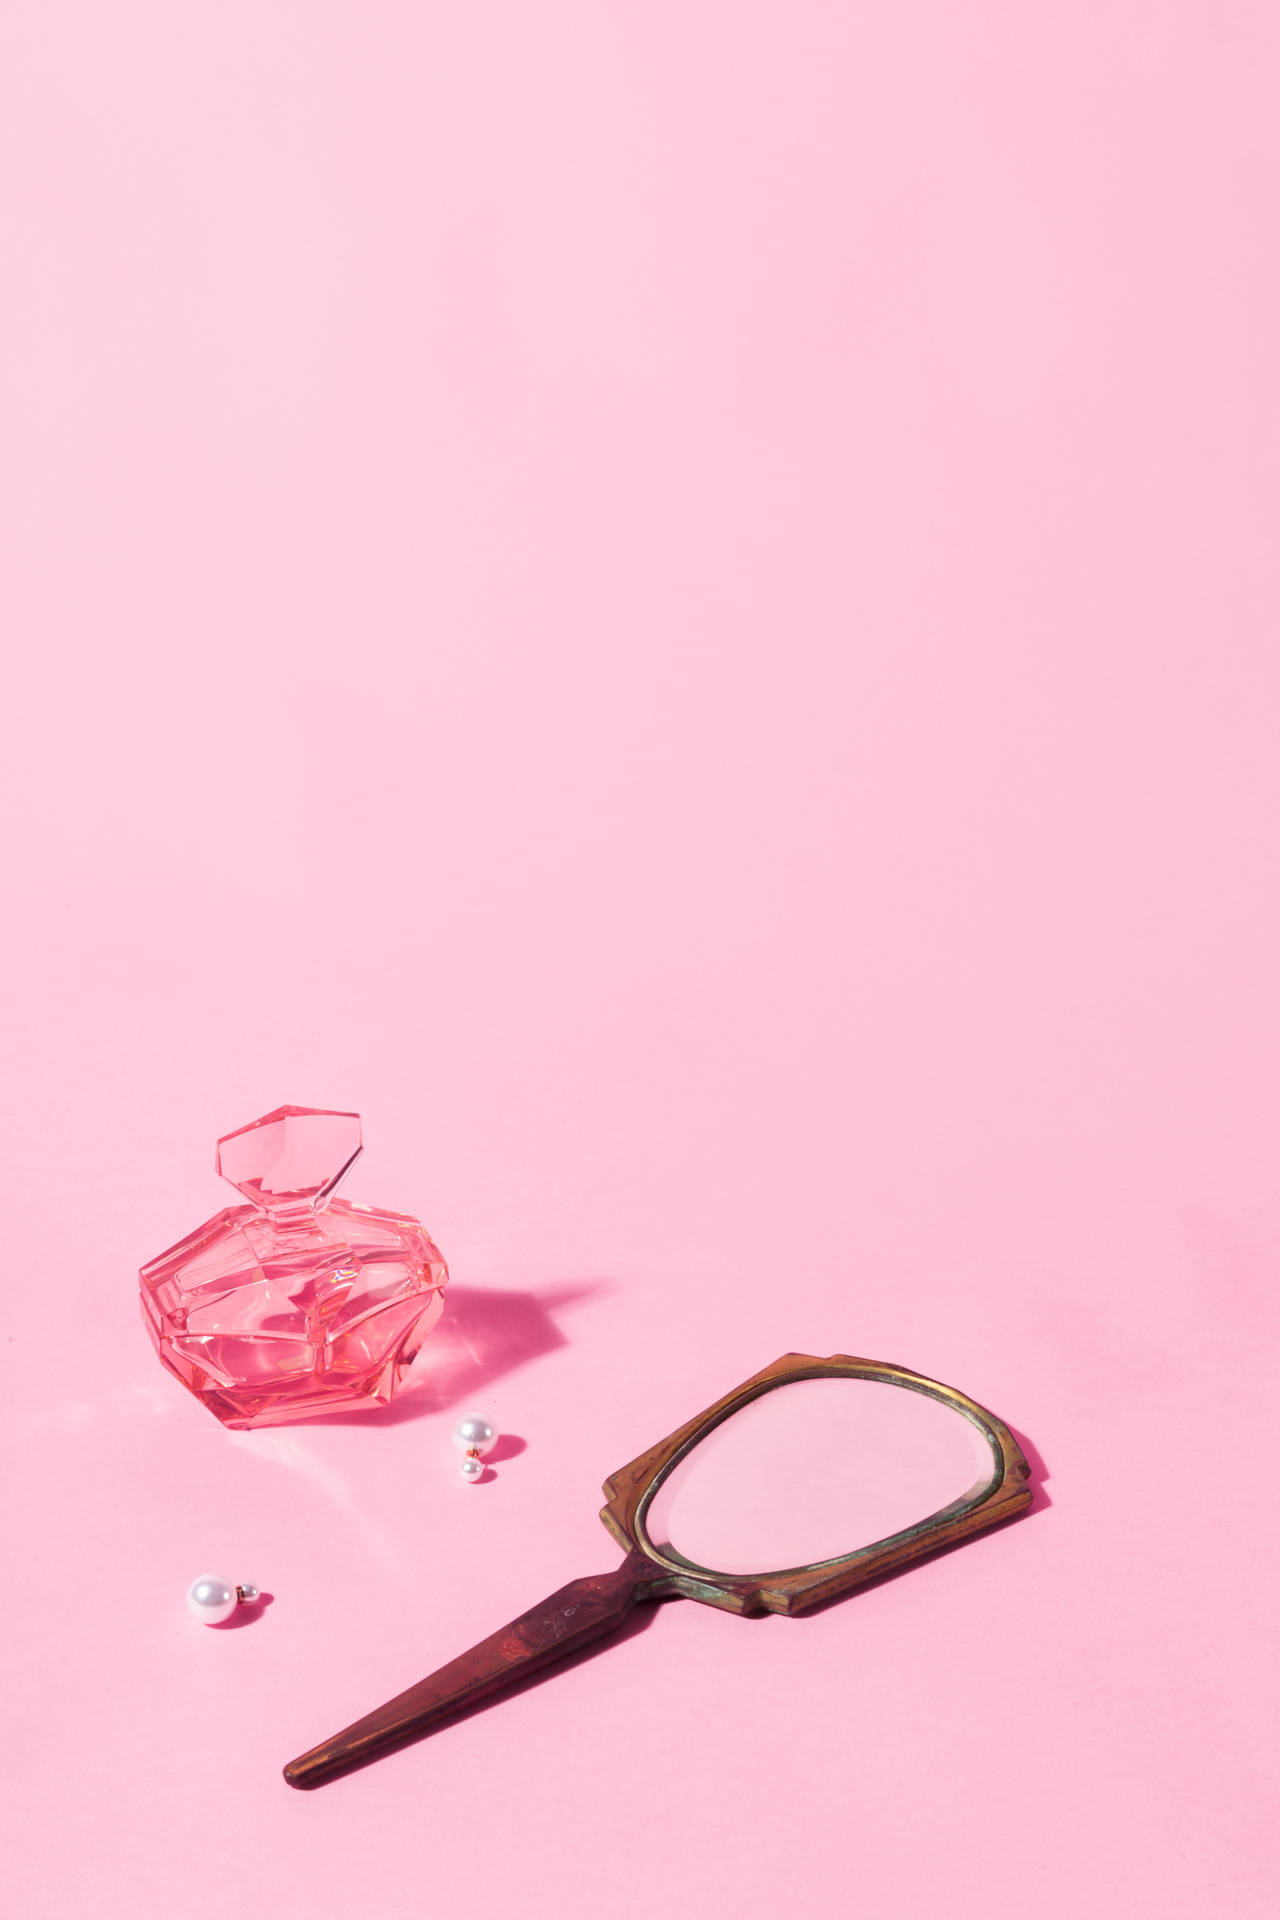 Trinkets On Pastel Pink Color Table Background